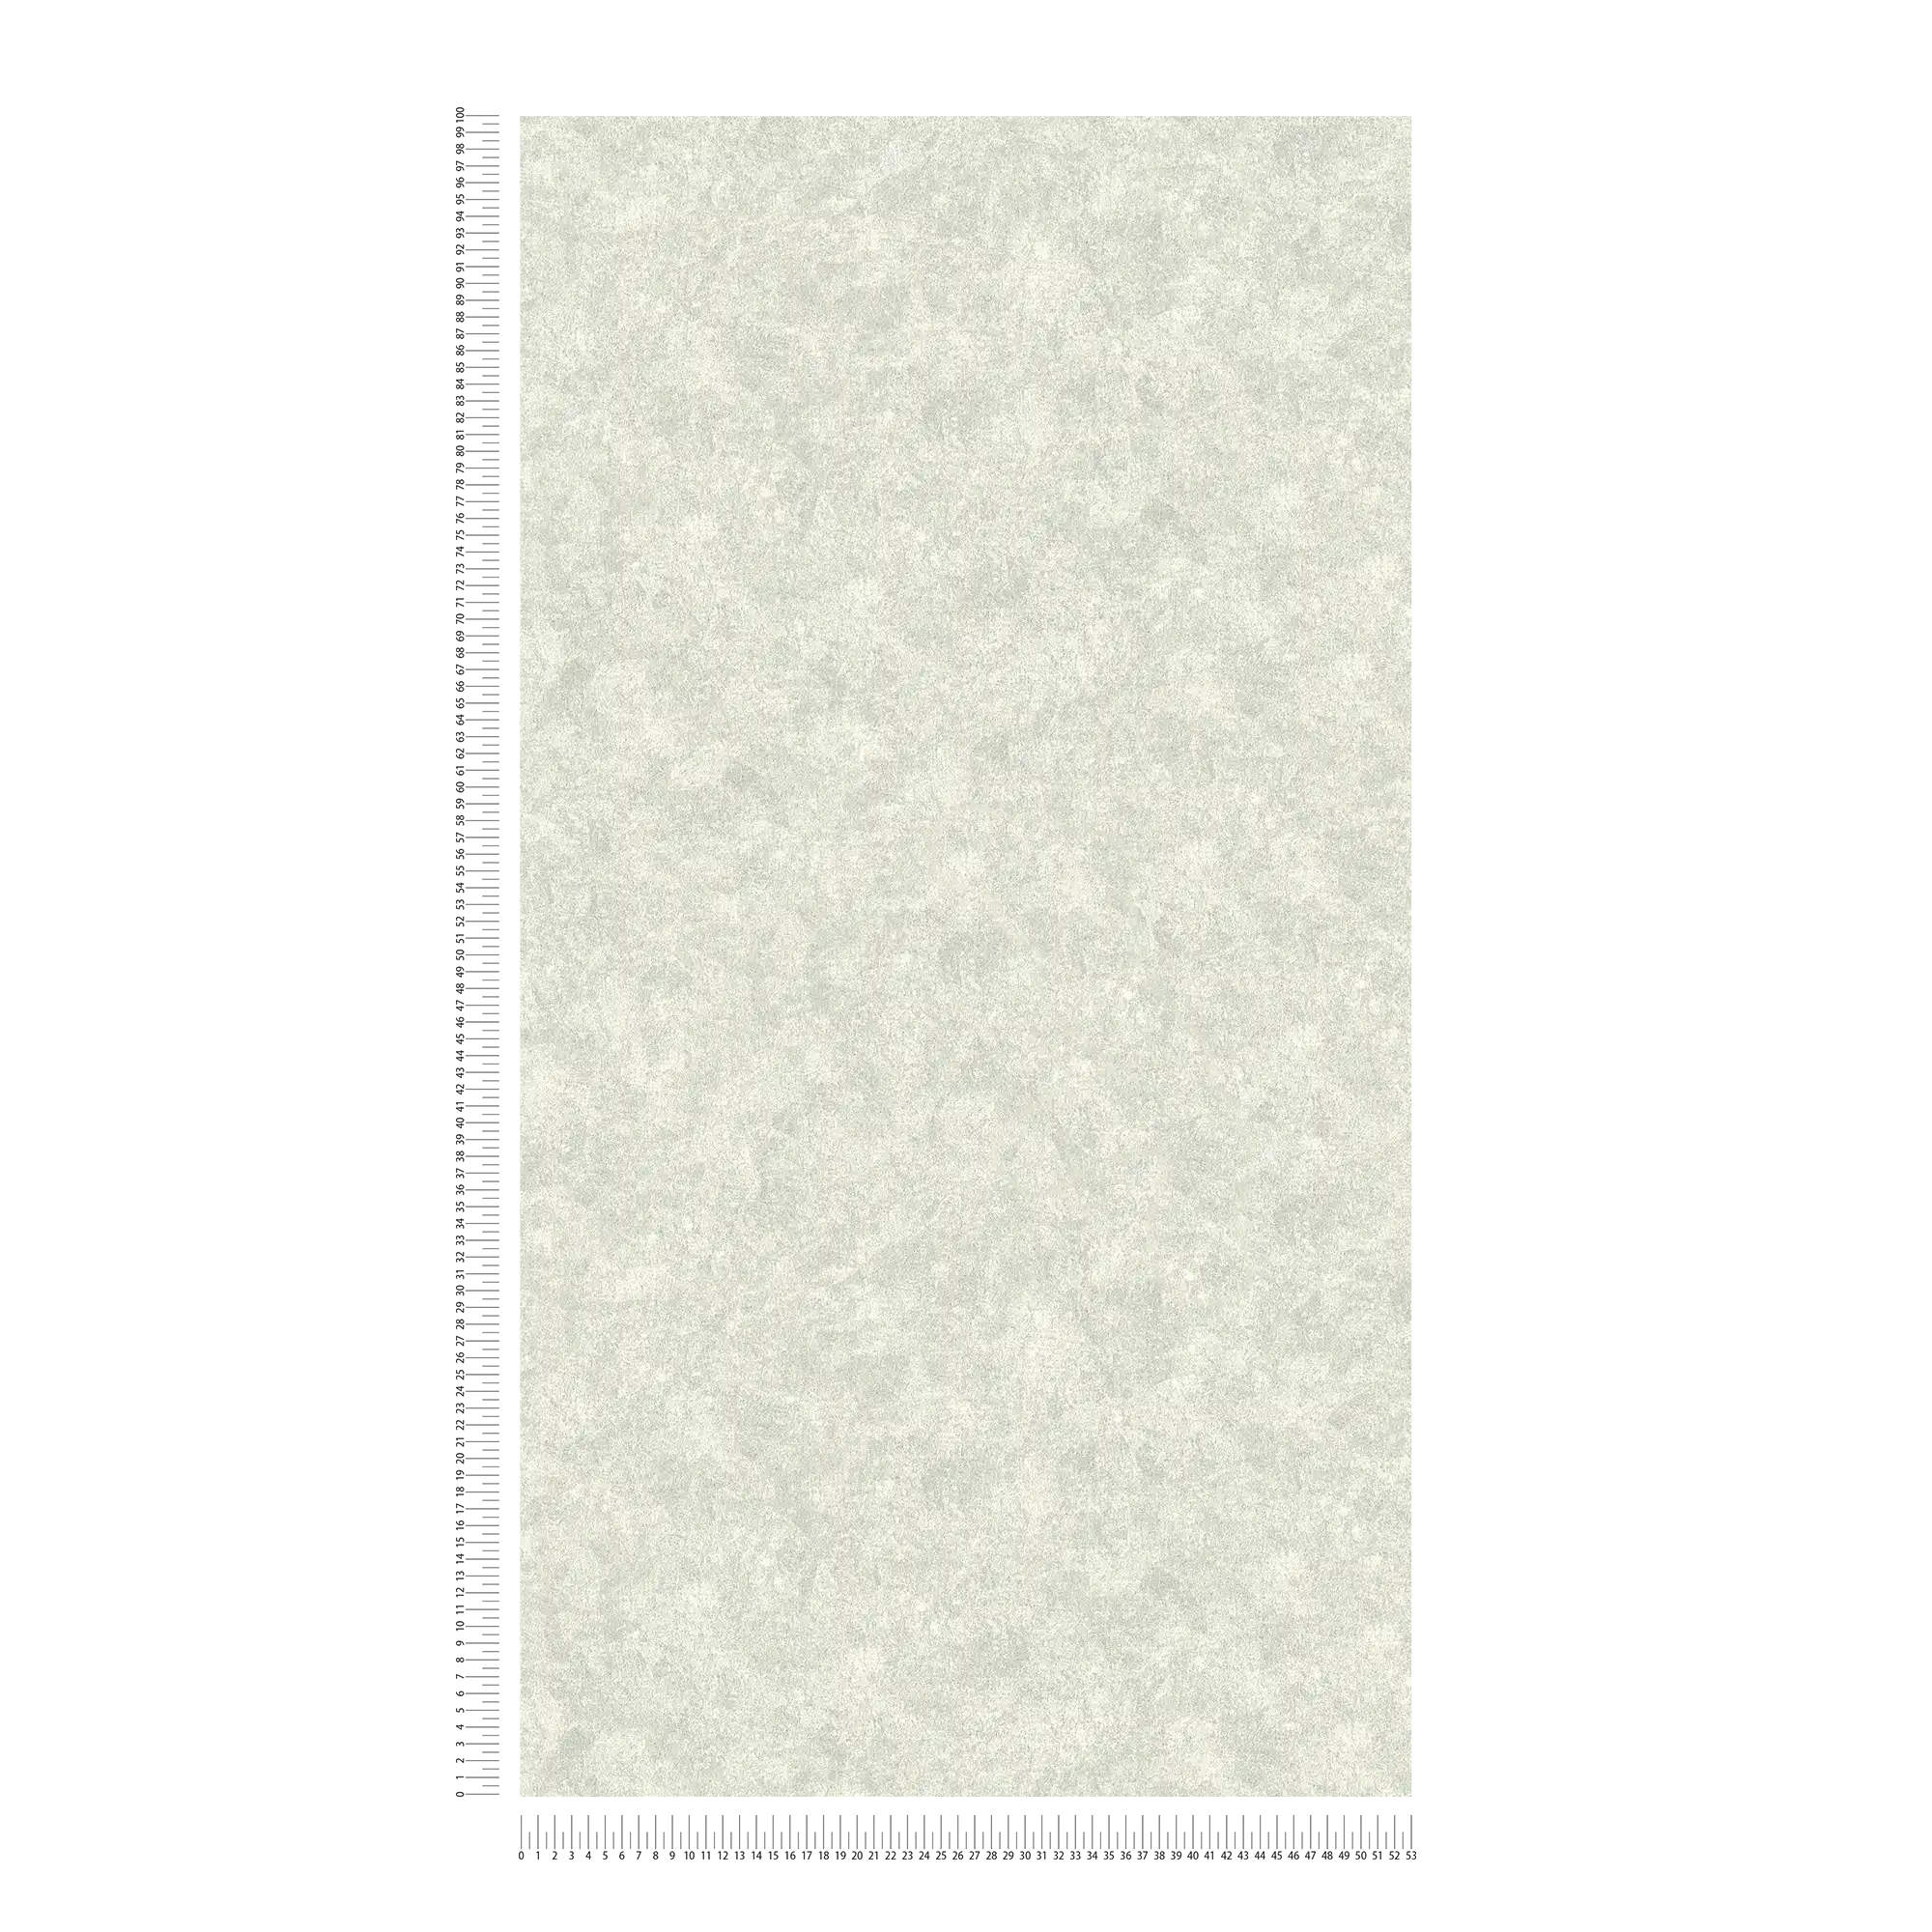             Plain wallpaper with mottled structure look - grey
        